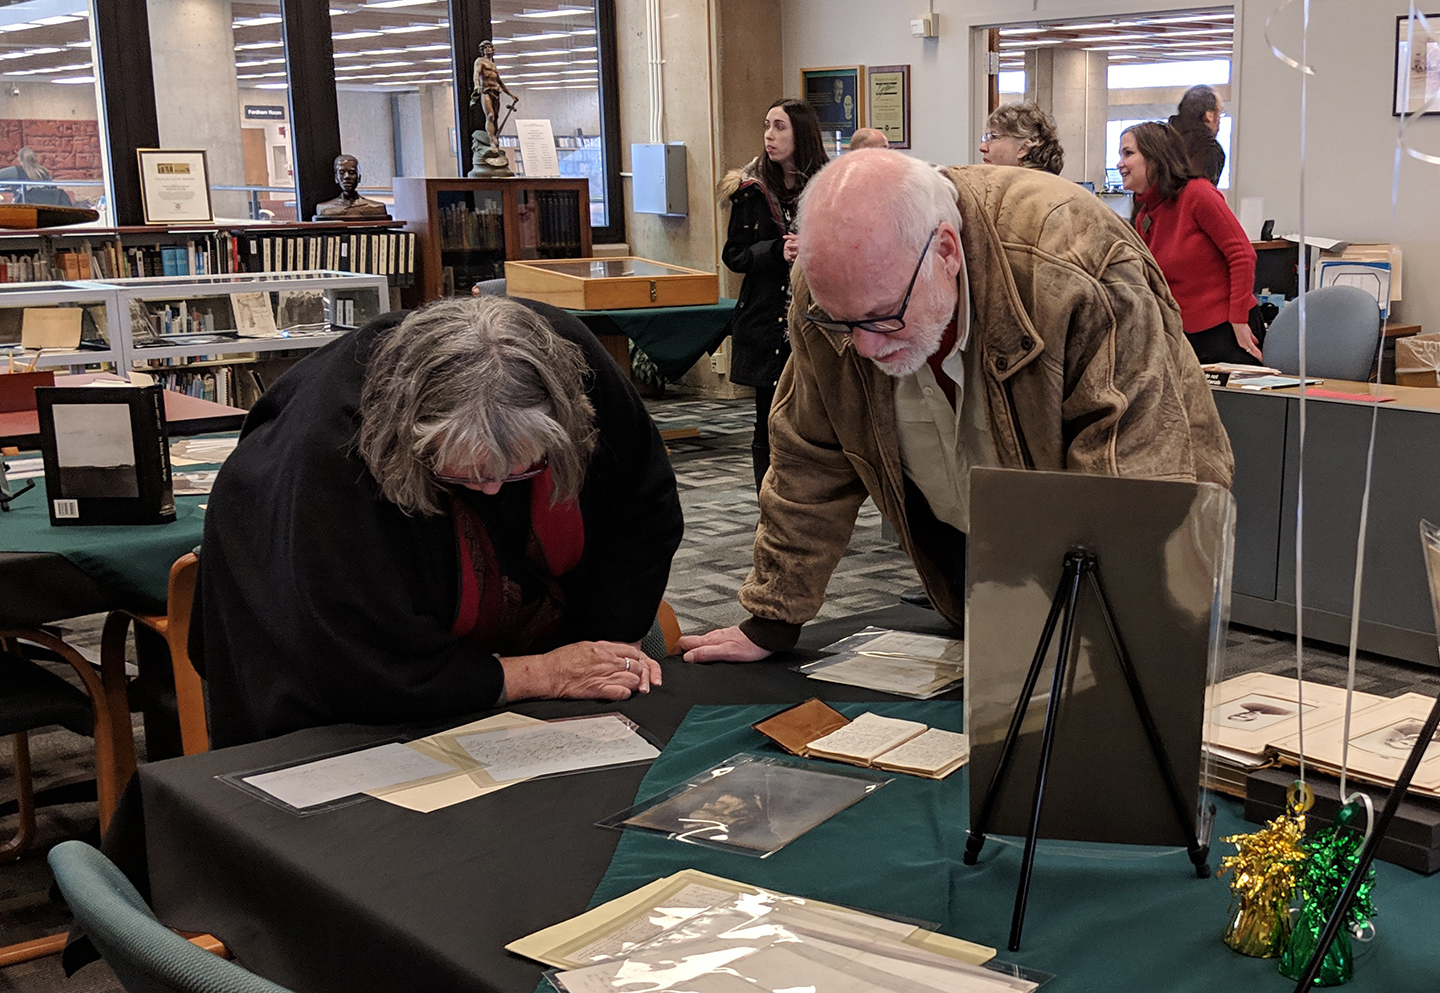 Visitors reading the Bishop's diaries and letters